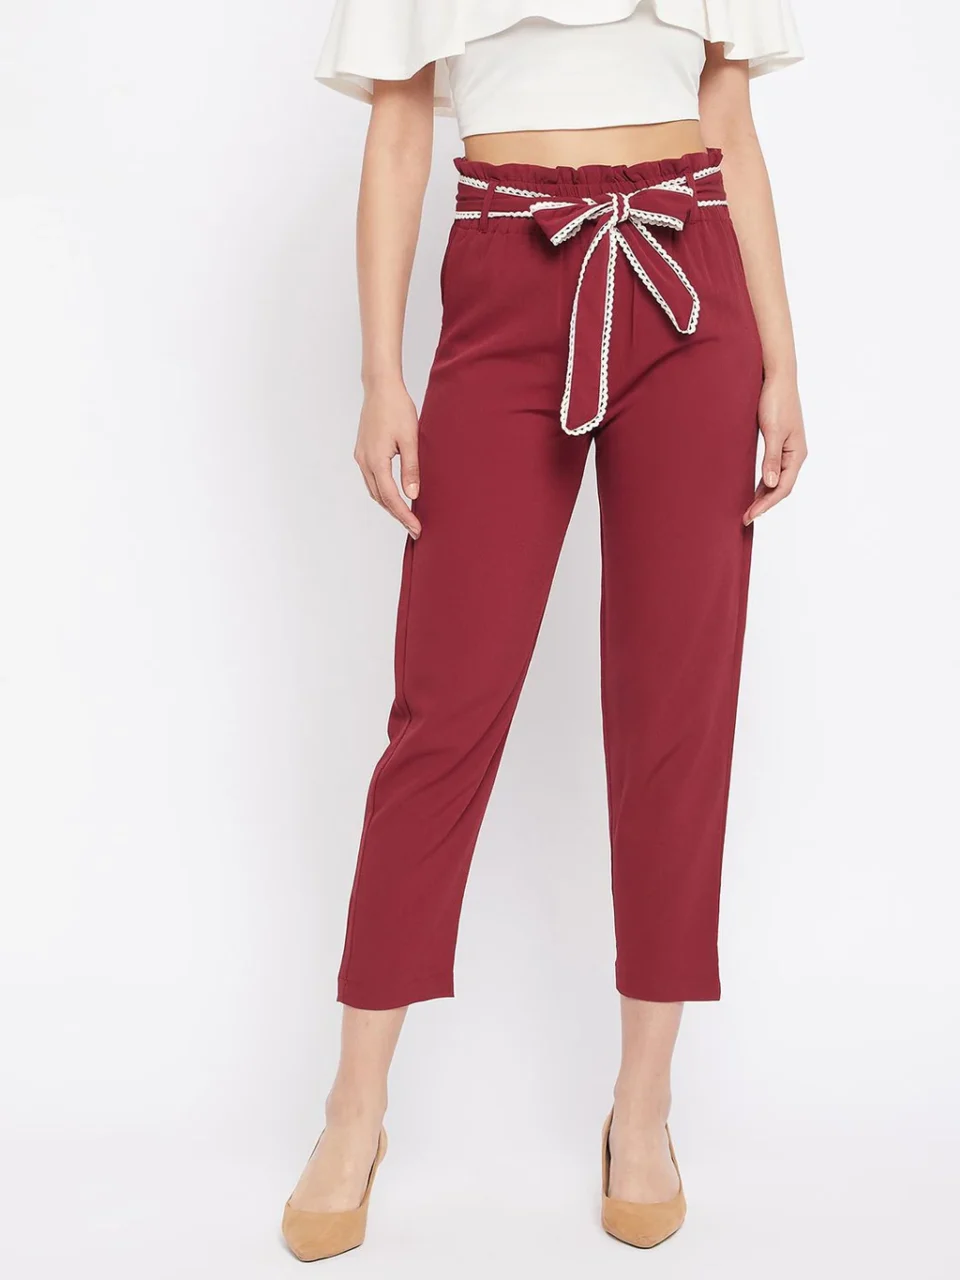 Trousers by WineRed 